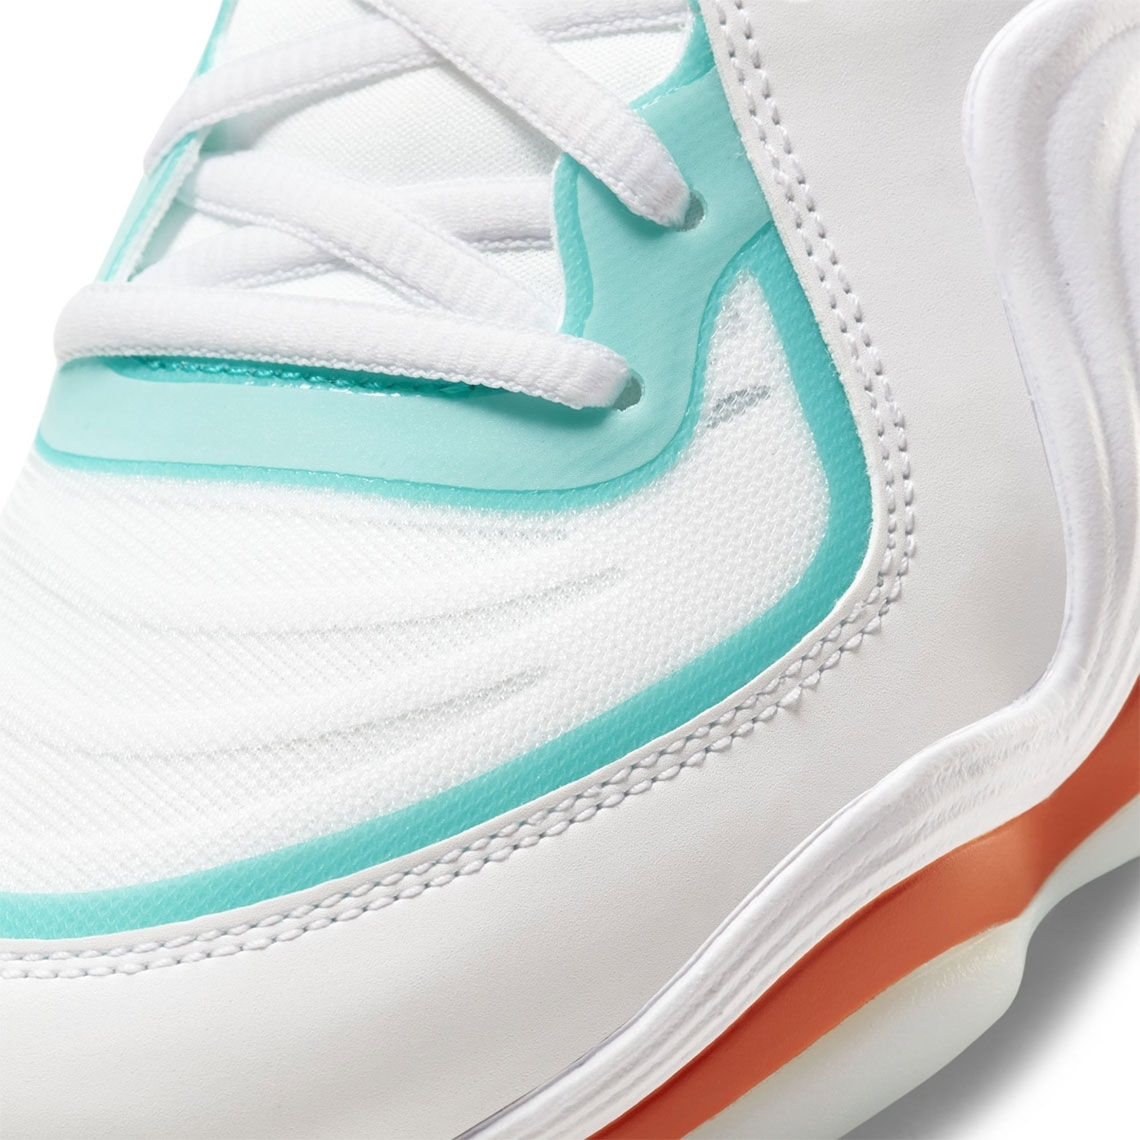 Nike Air Penny 5 White Teal Orange Dolphins 2020 2